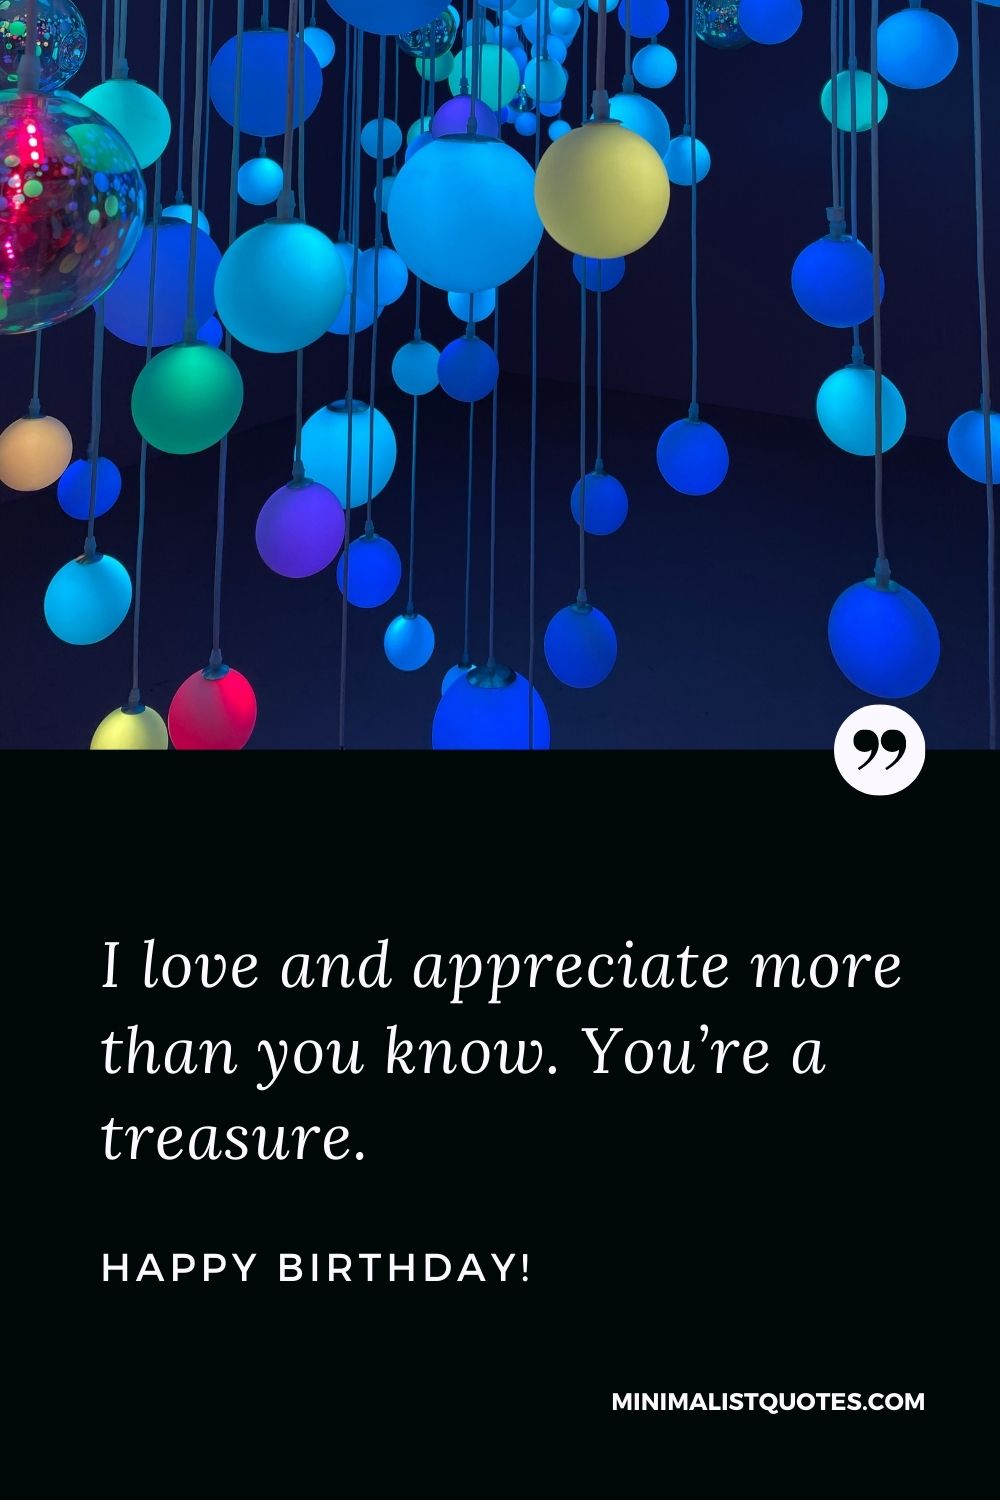 Birthday wish, quote & message with image: I love and appreciate more than you know. You’re a treasure. Happy Birthday!